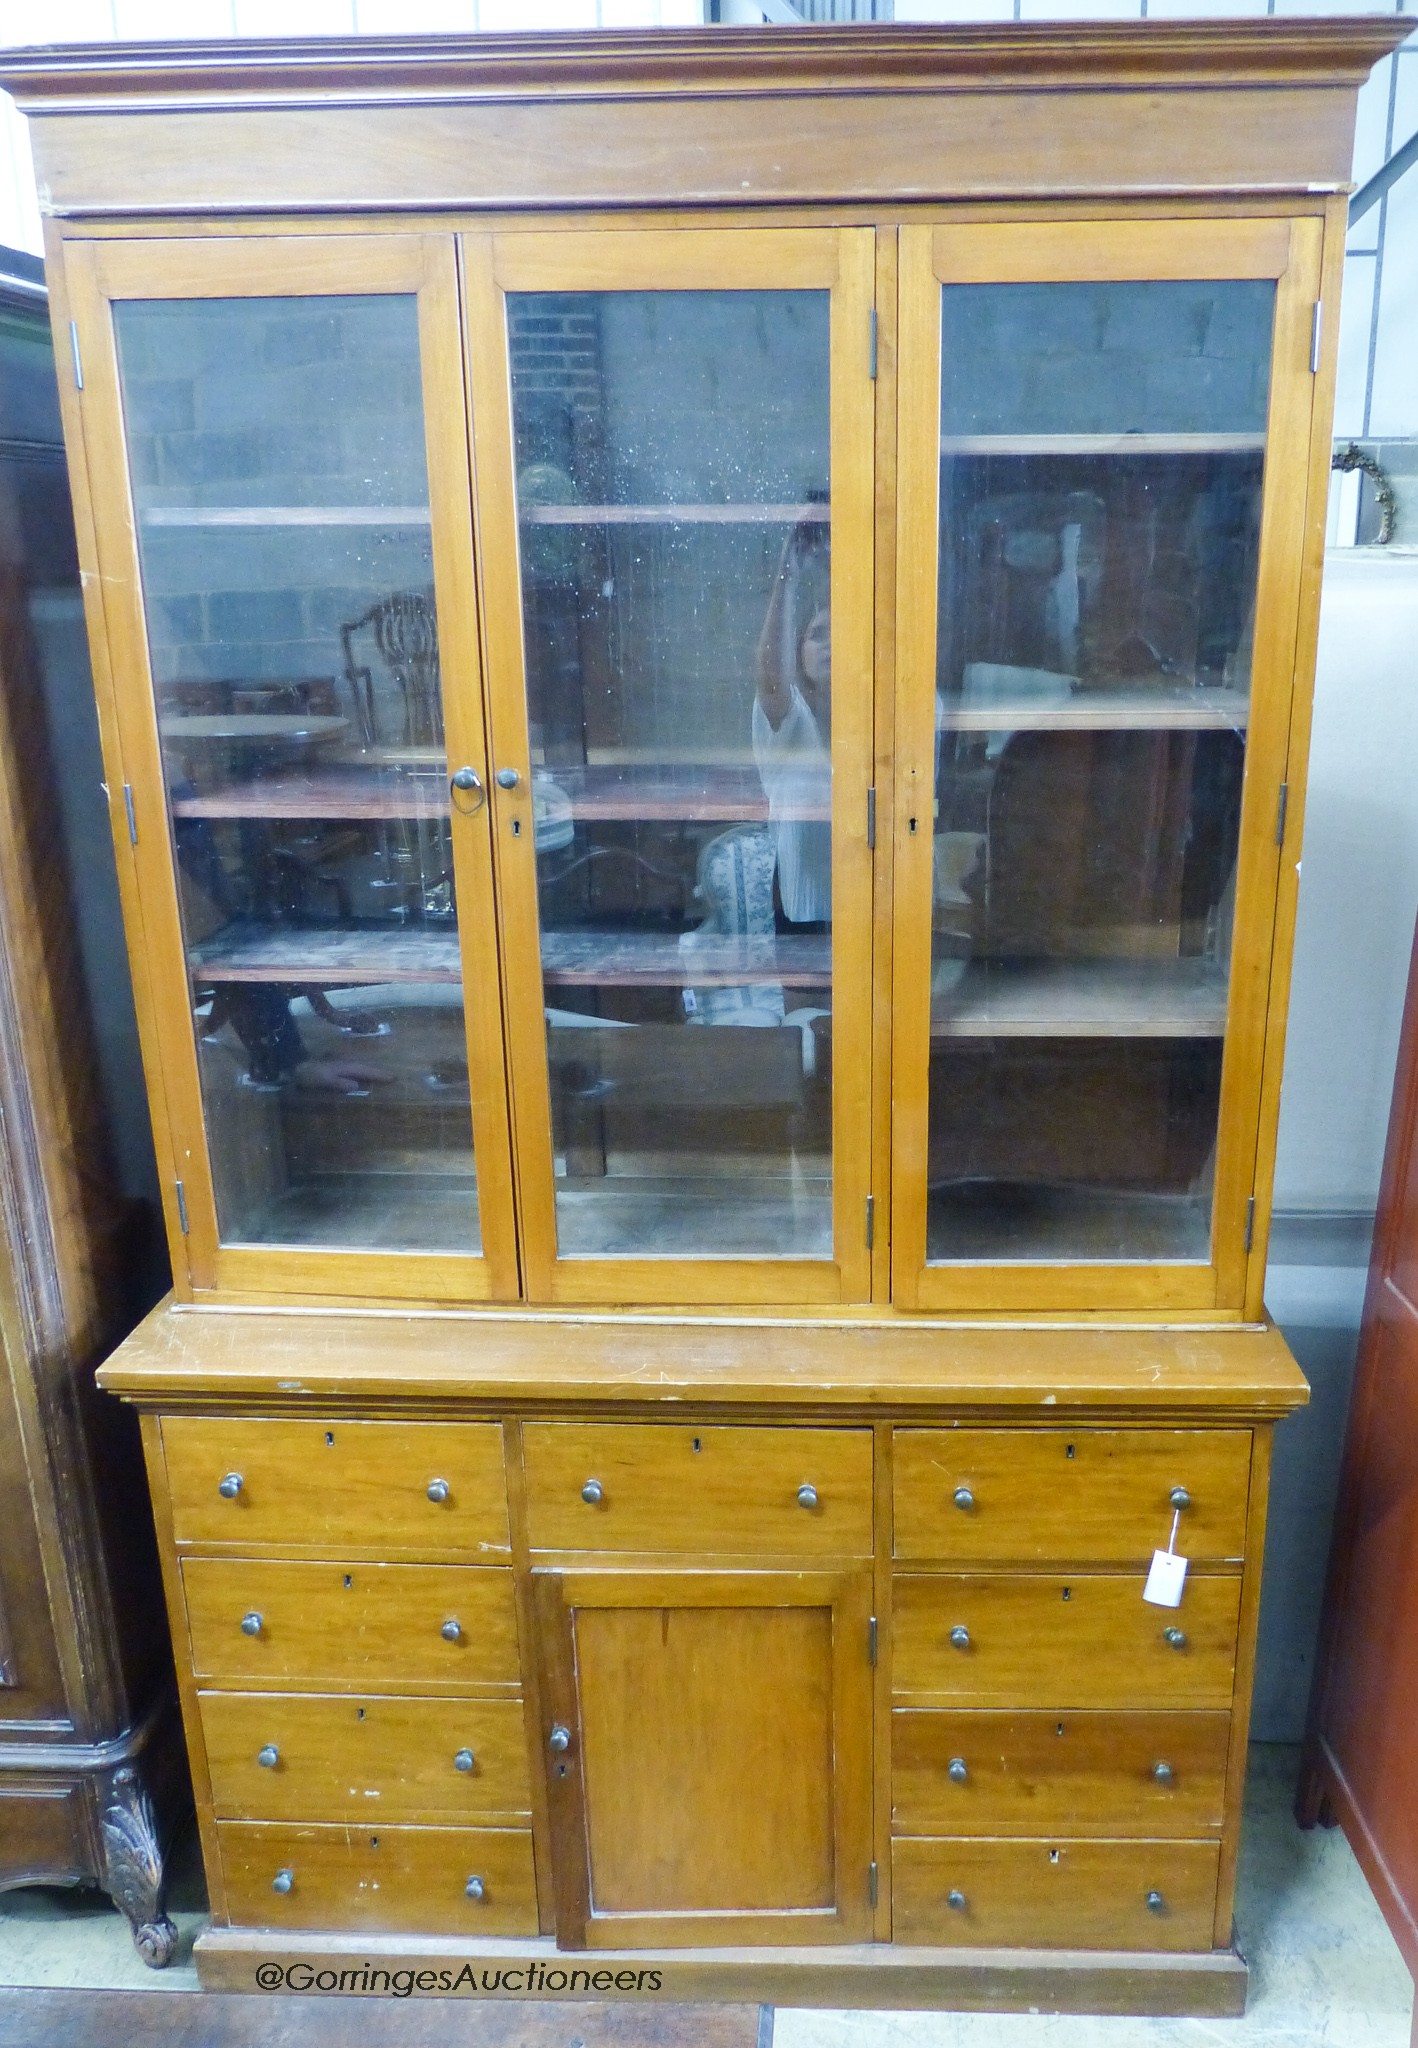 An early 20th century mahogany shopkeeper's bookcase cupboard. W-137, D-50, H-230cm.